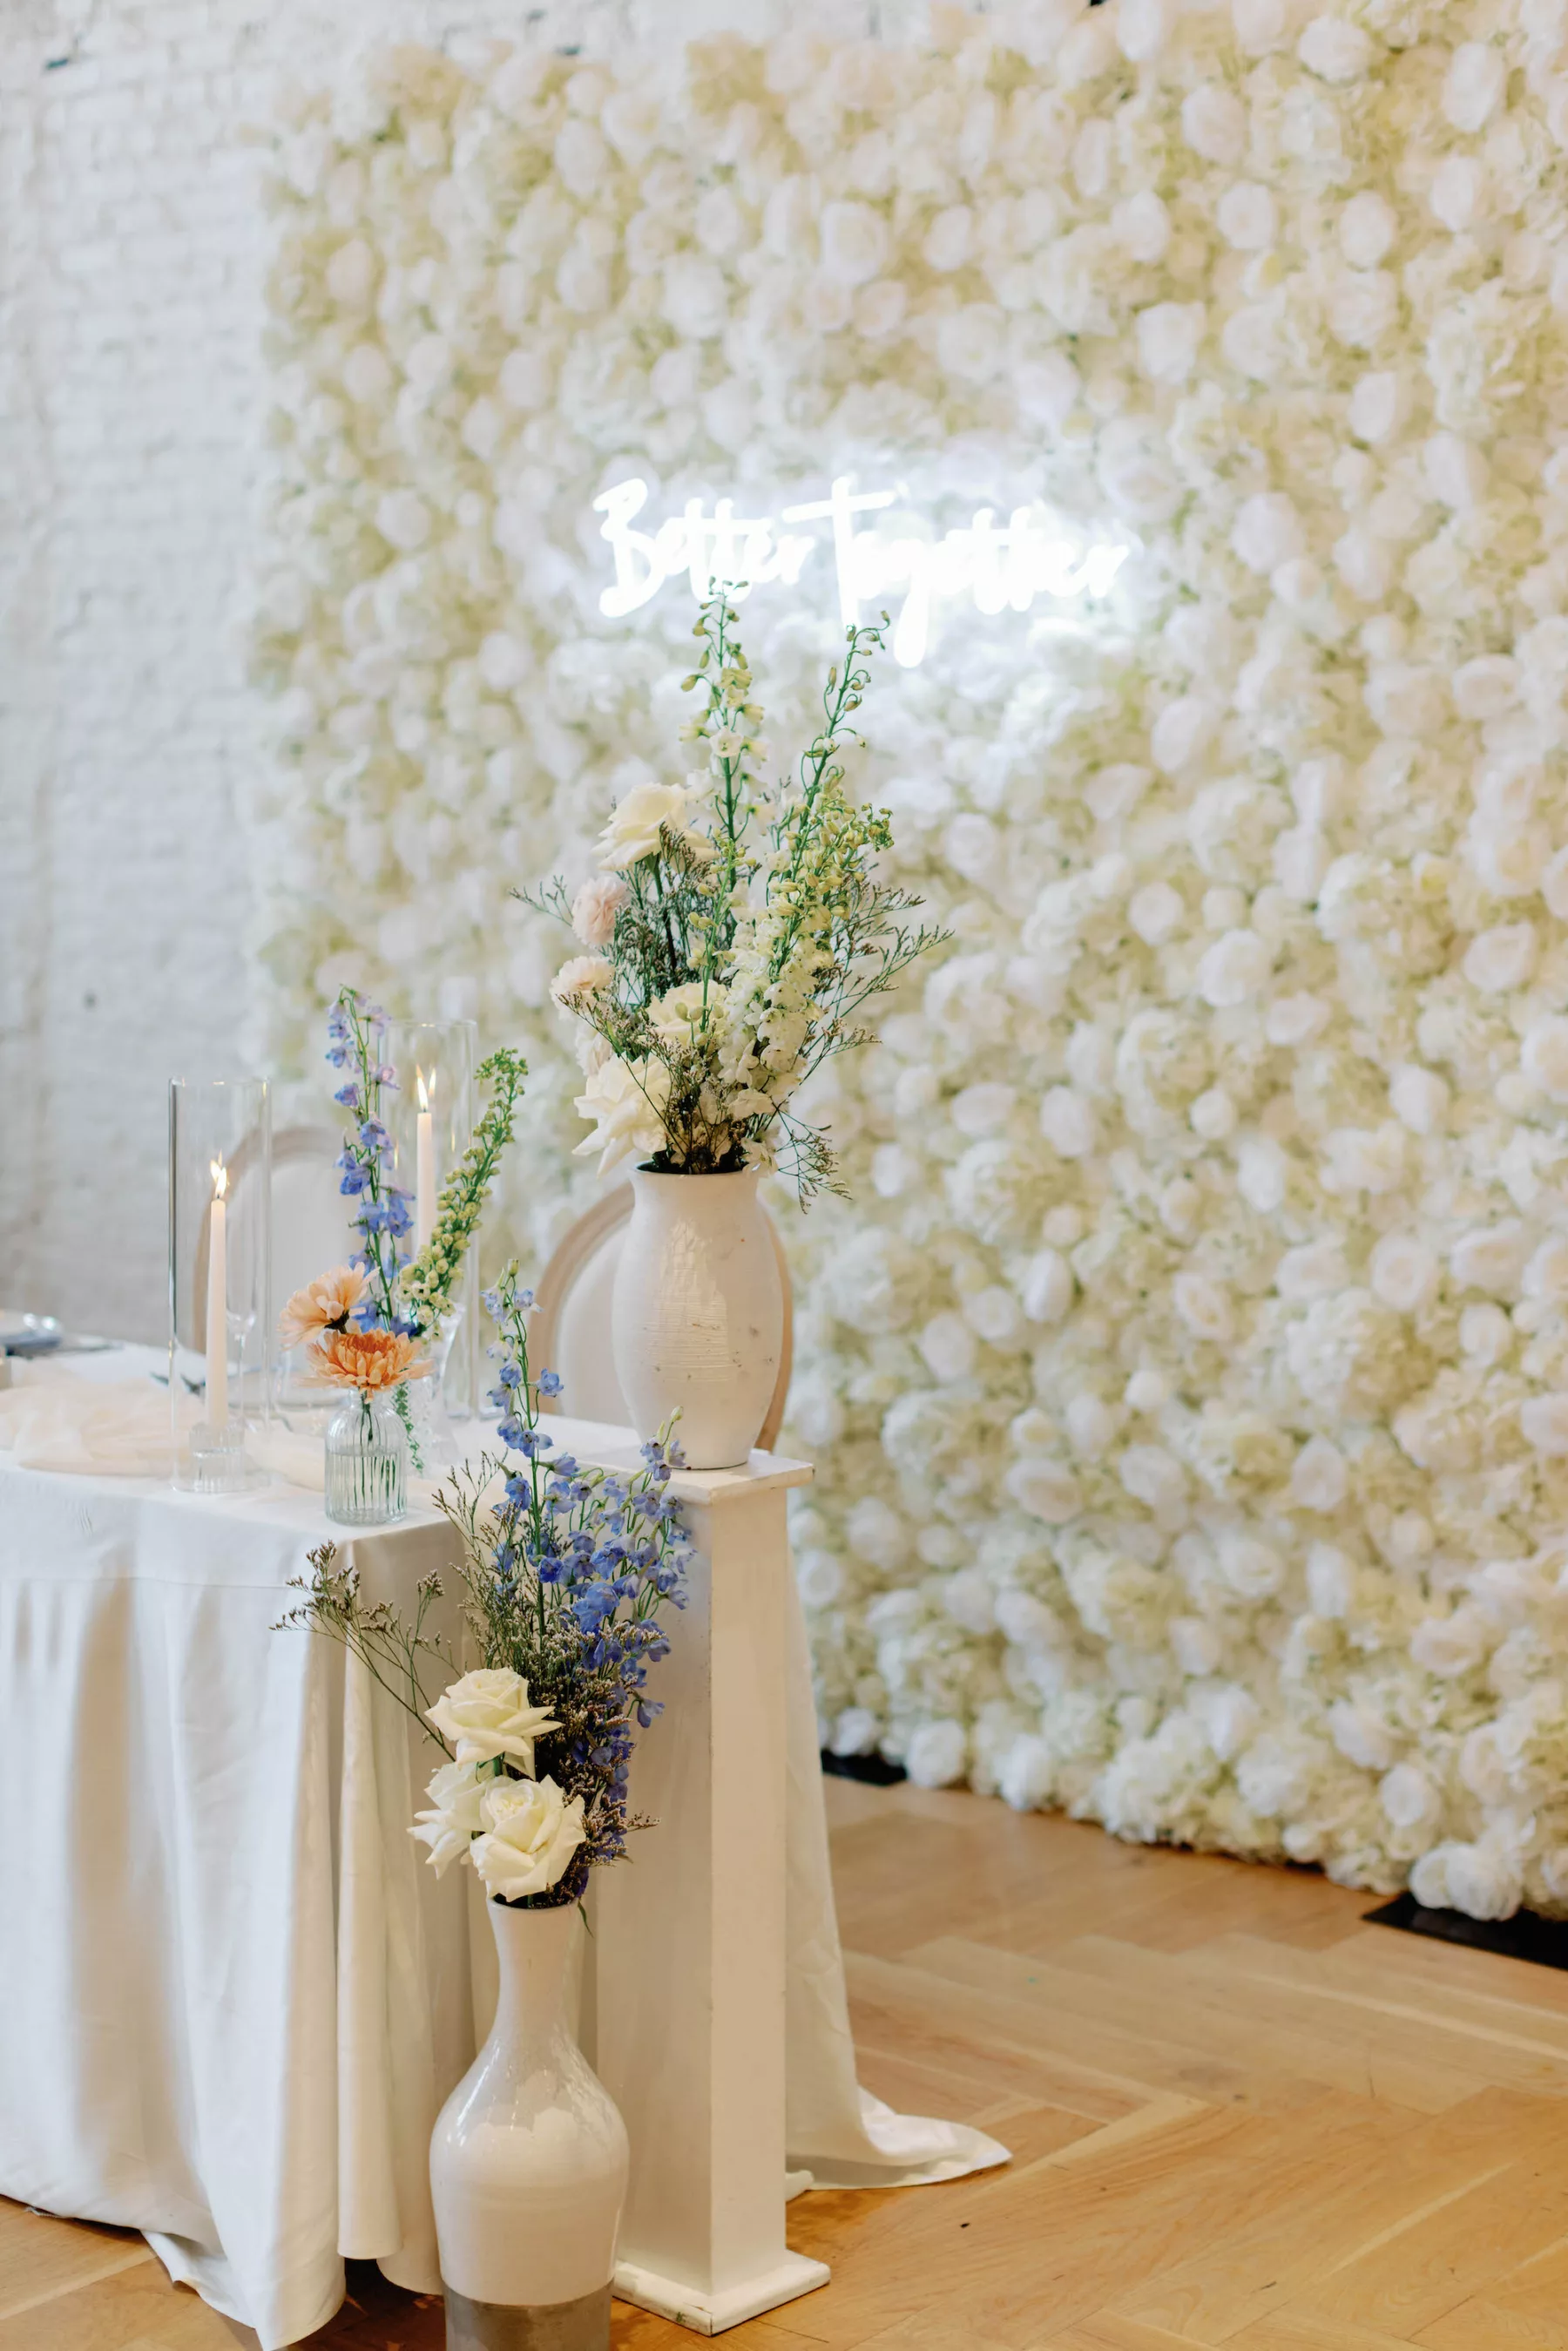 Whimsical Spring Wedding Reception Sweetheart Decor Ideas | White Rose Wall Backdrop Inspiration | Blue and White Lily of the Valley, White Carnations, and Orange Chrysanthemums